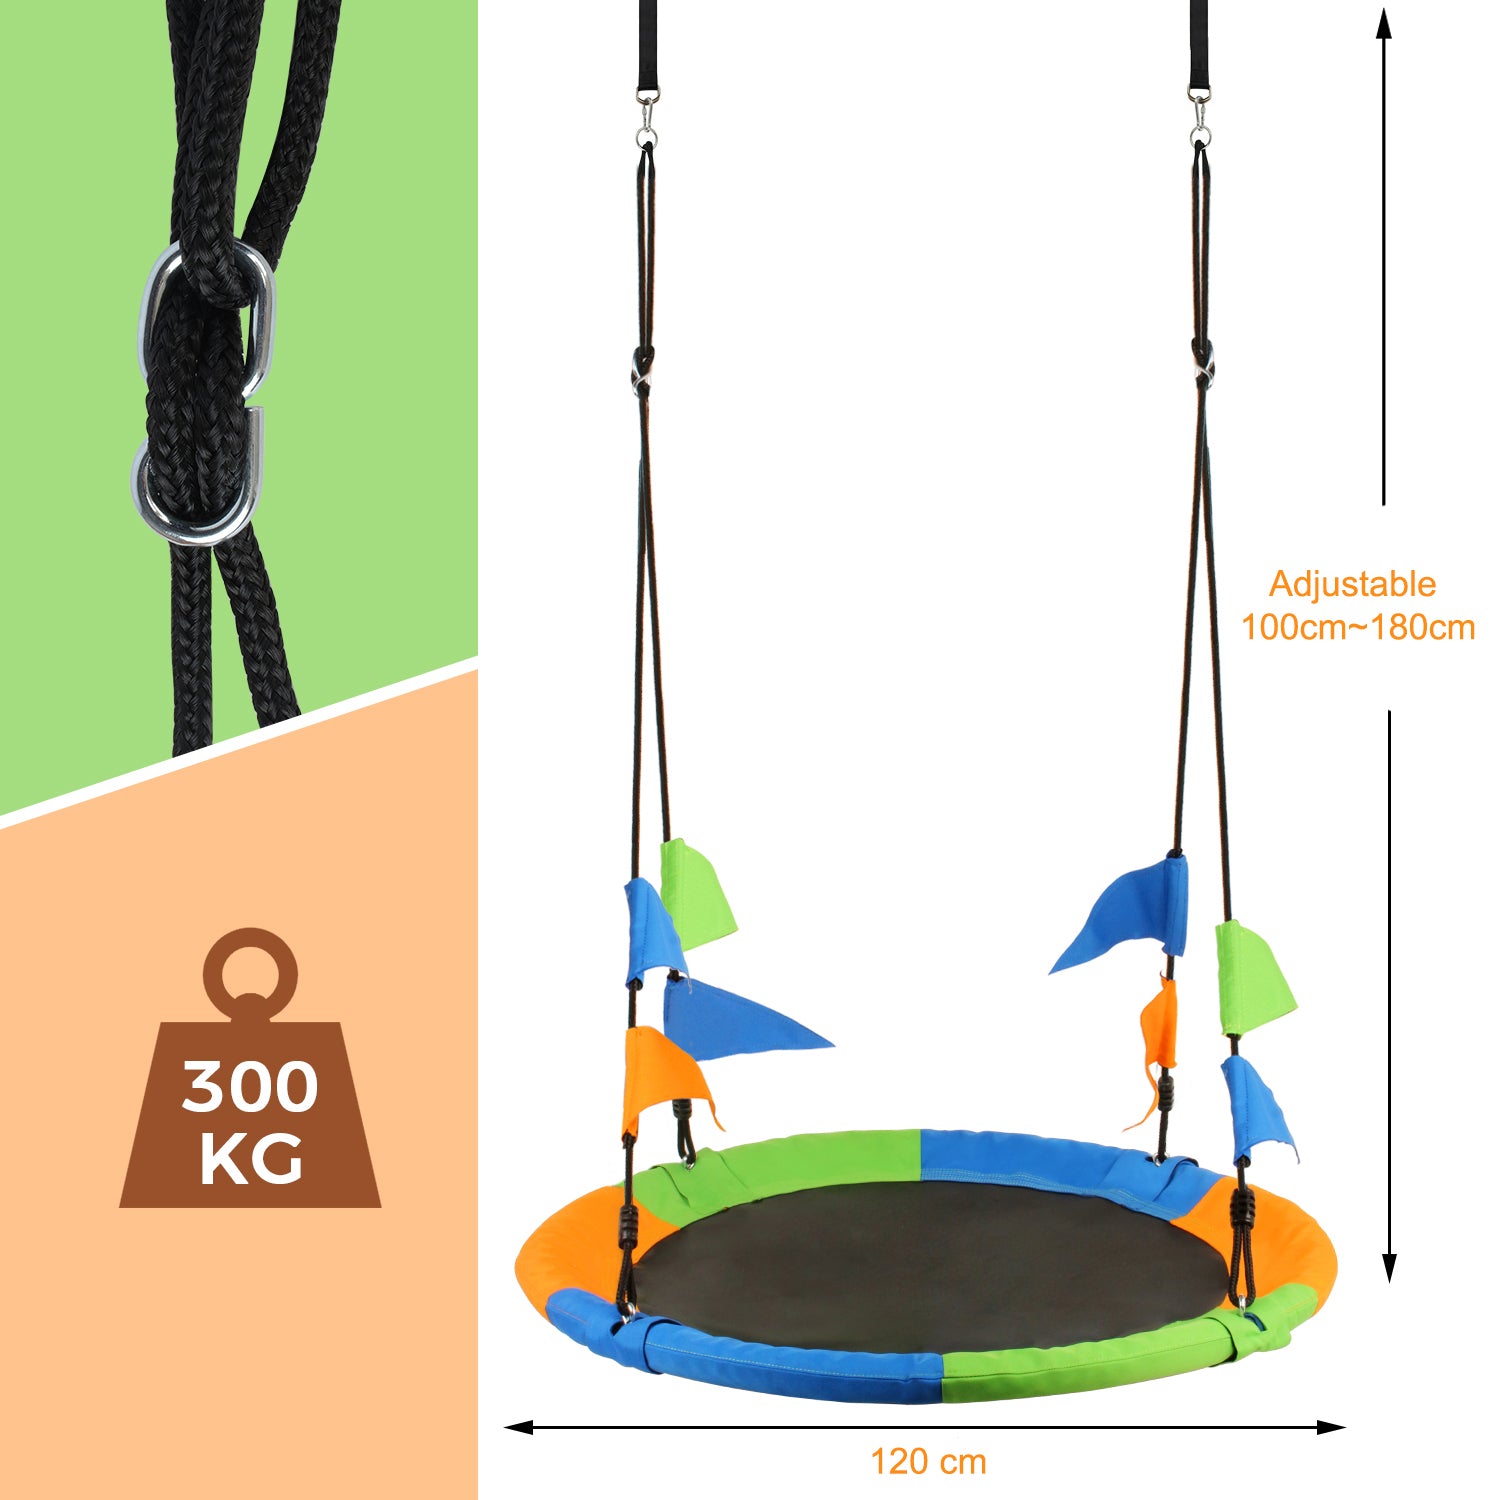 Leogreen-Bird-s-Nest-Swing-120-cm-Maximum-Load-300-kg-Height-Adjustable-from-100-to-180cm-with-Hanging-Straps-Together-for-Children-and-Adults-Multicolored